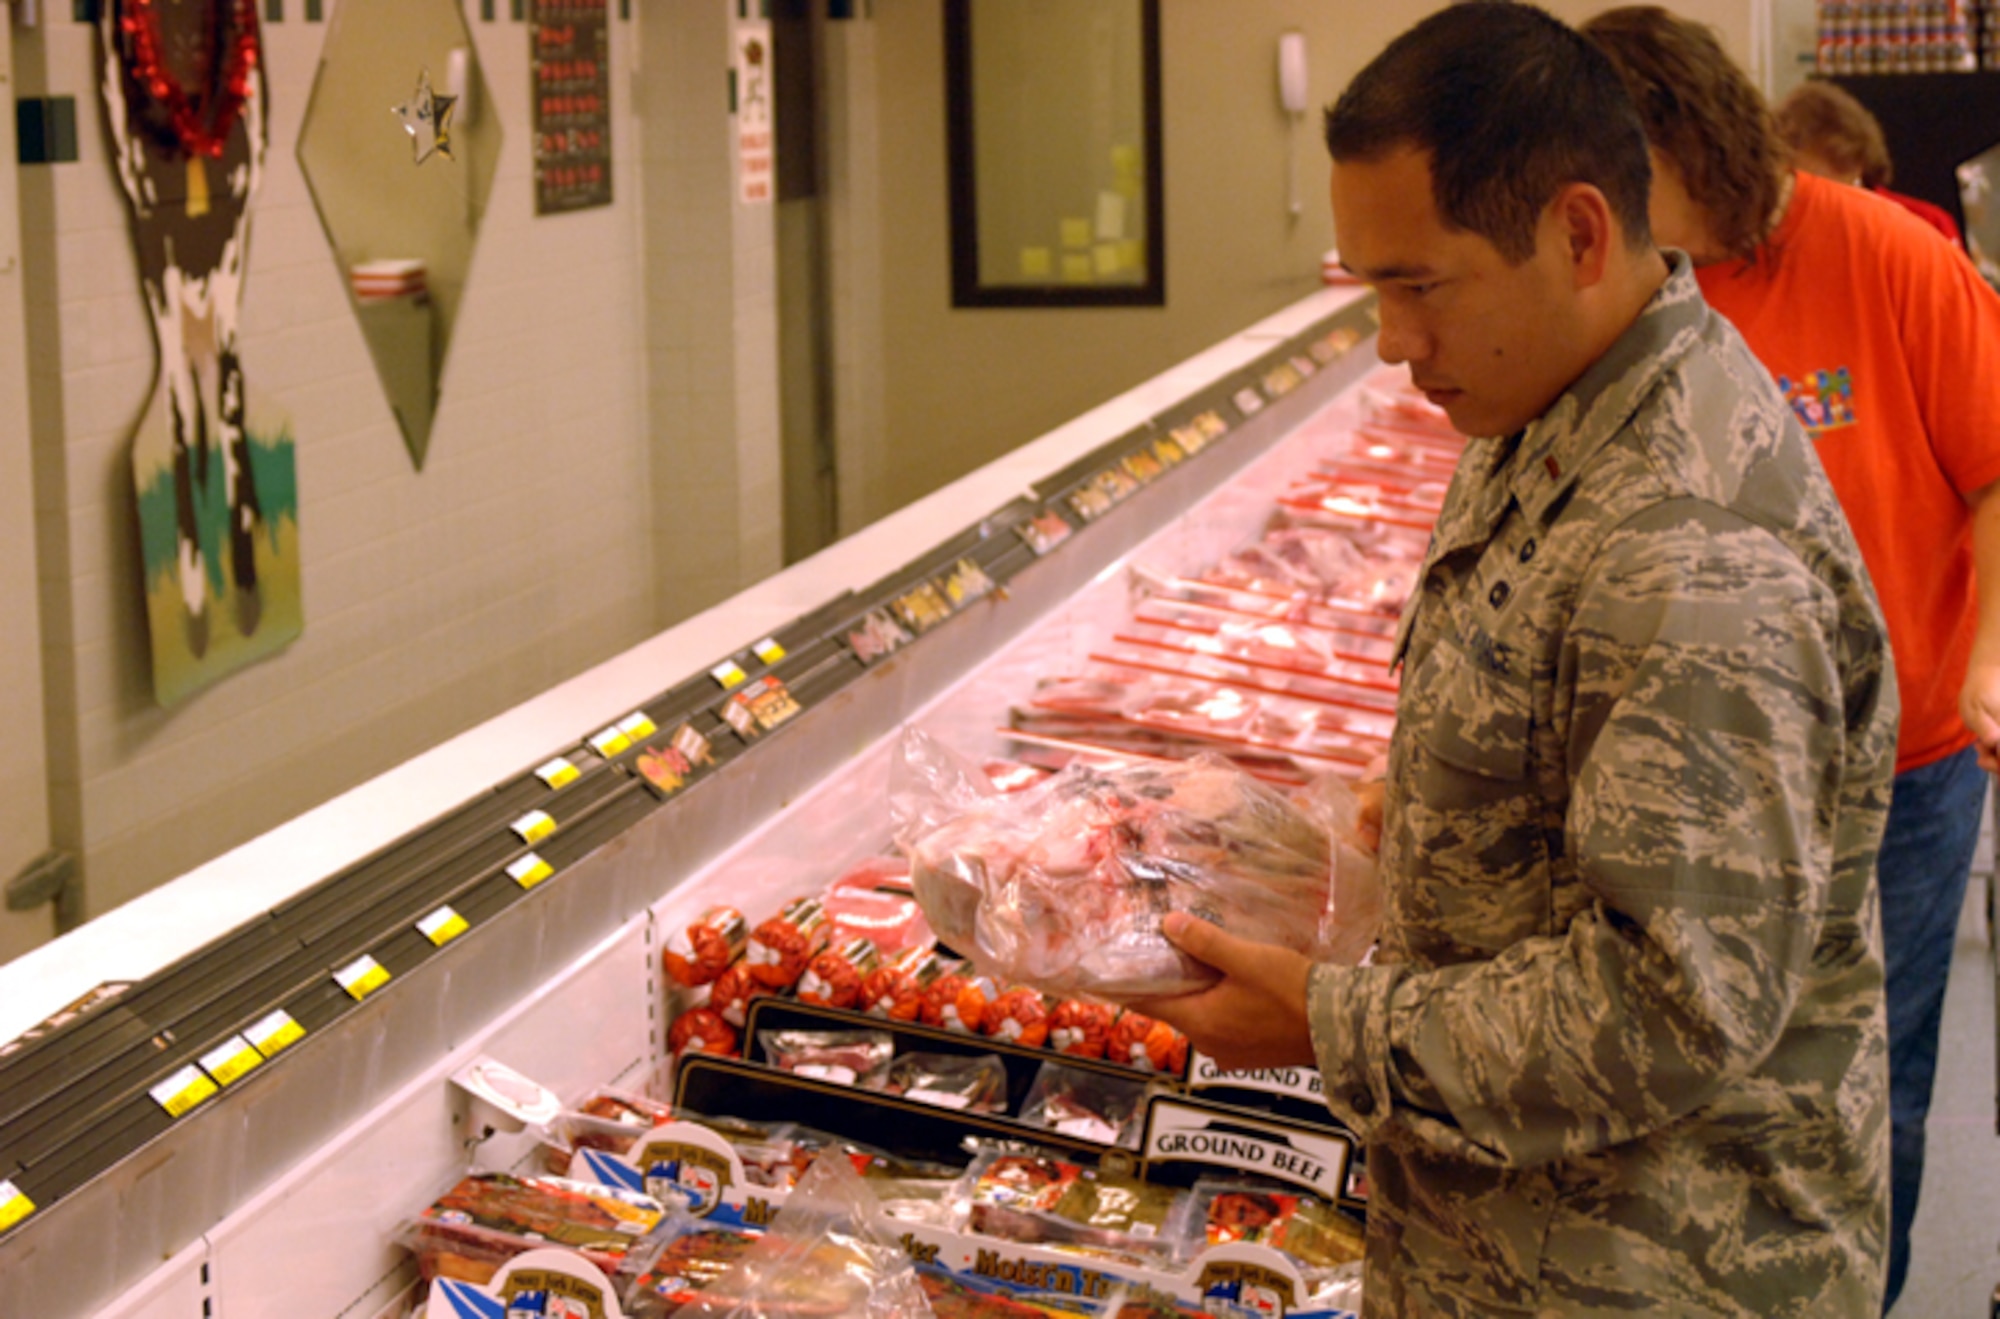 Second Lt. Clay Toerner, 14th Operational Support Squadron, selects a leg of lamb from the meat department at the Columbus AFB Commissary. Commissary meat departments sell high quality meat products at significantly lower prices compared to those of supermarkets. (U.S. Air Force photo by Airman Josh Harbin)